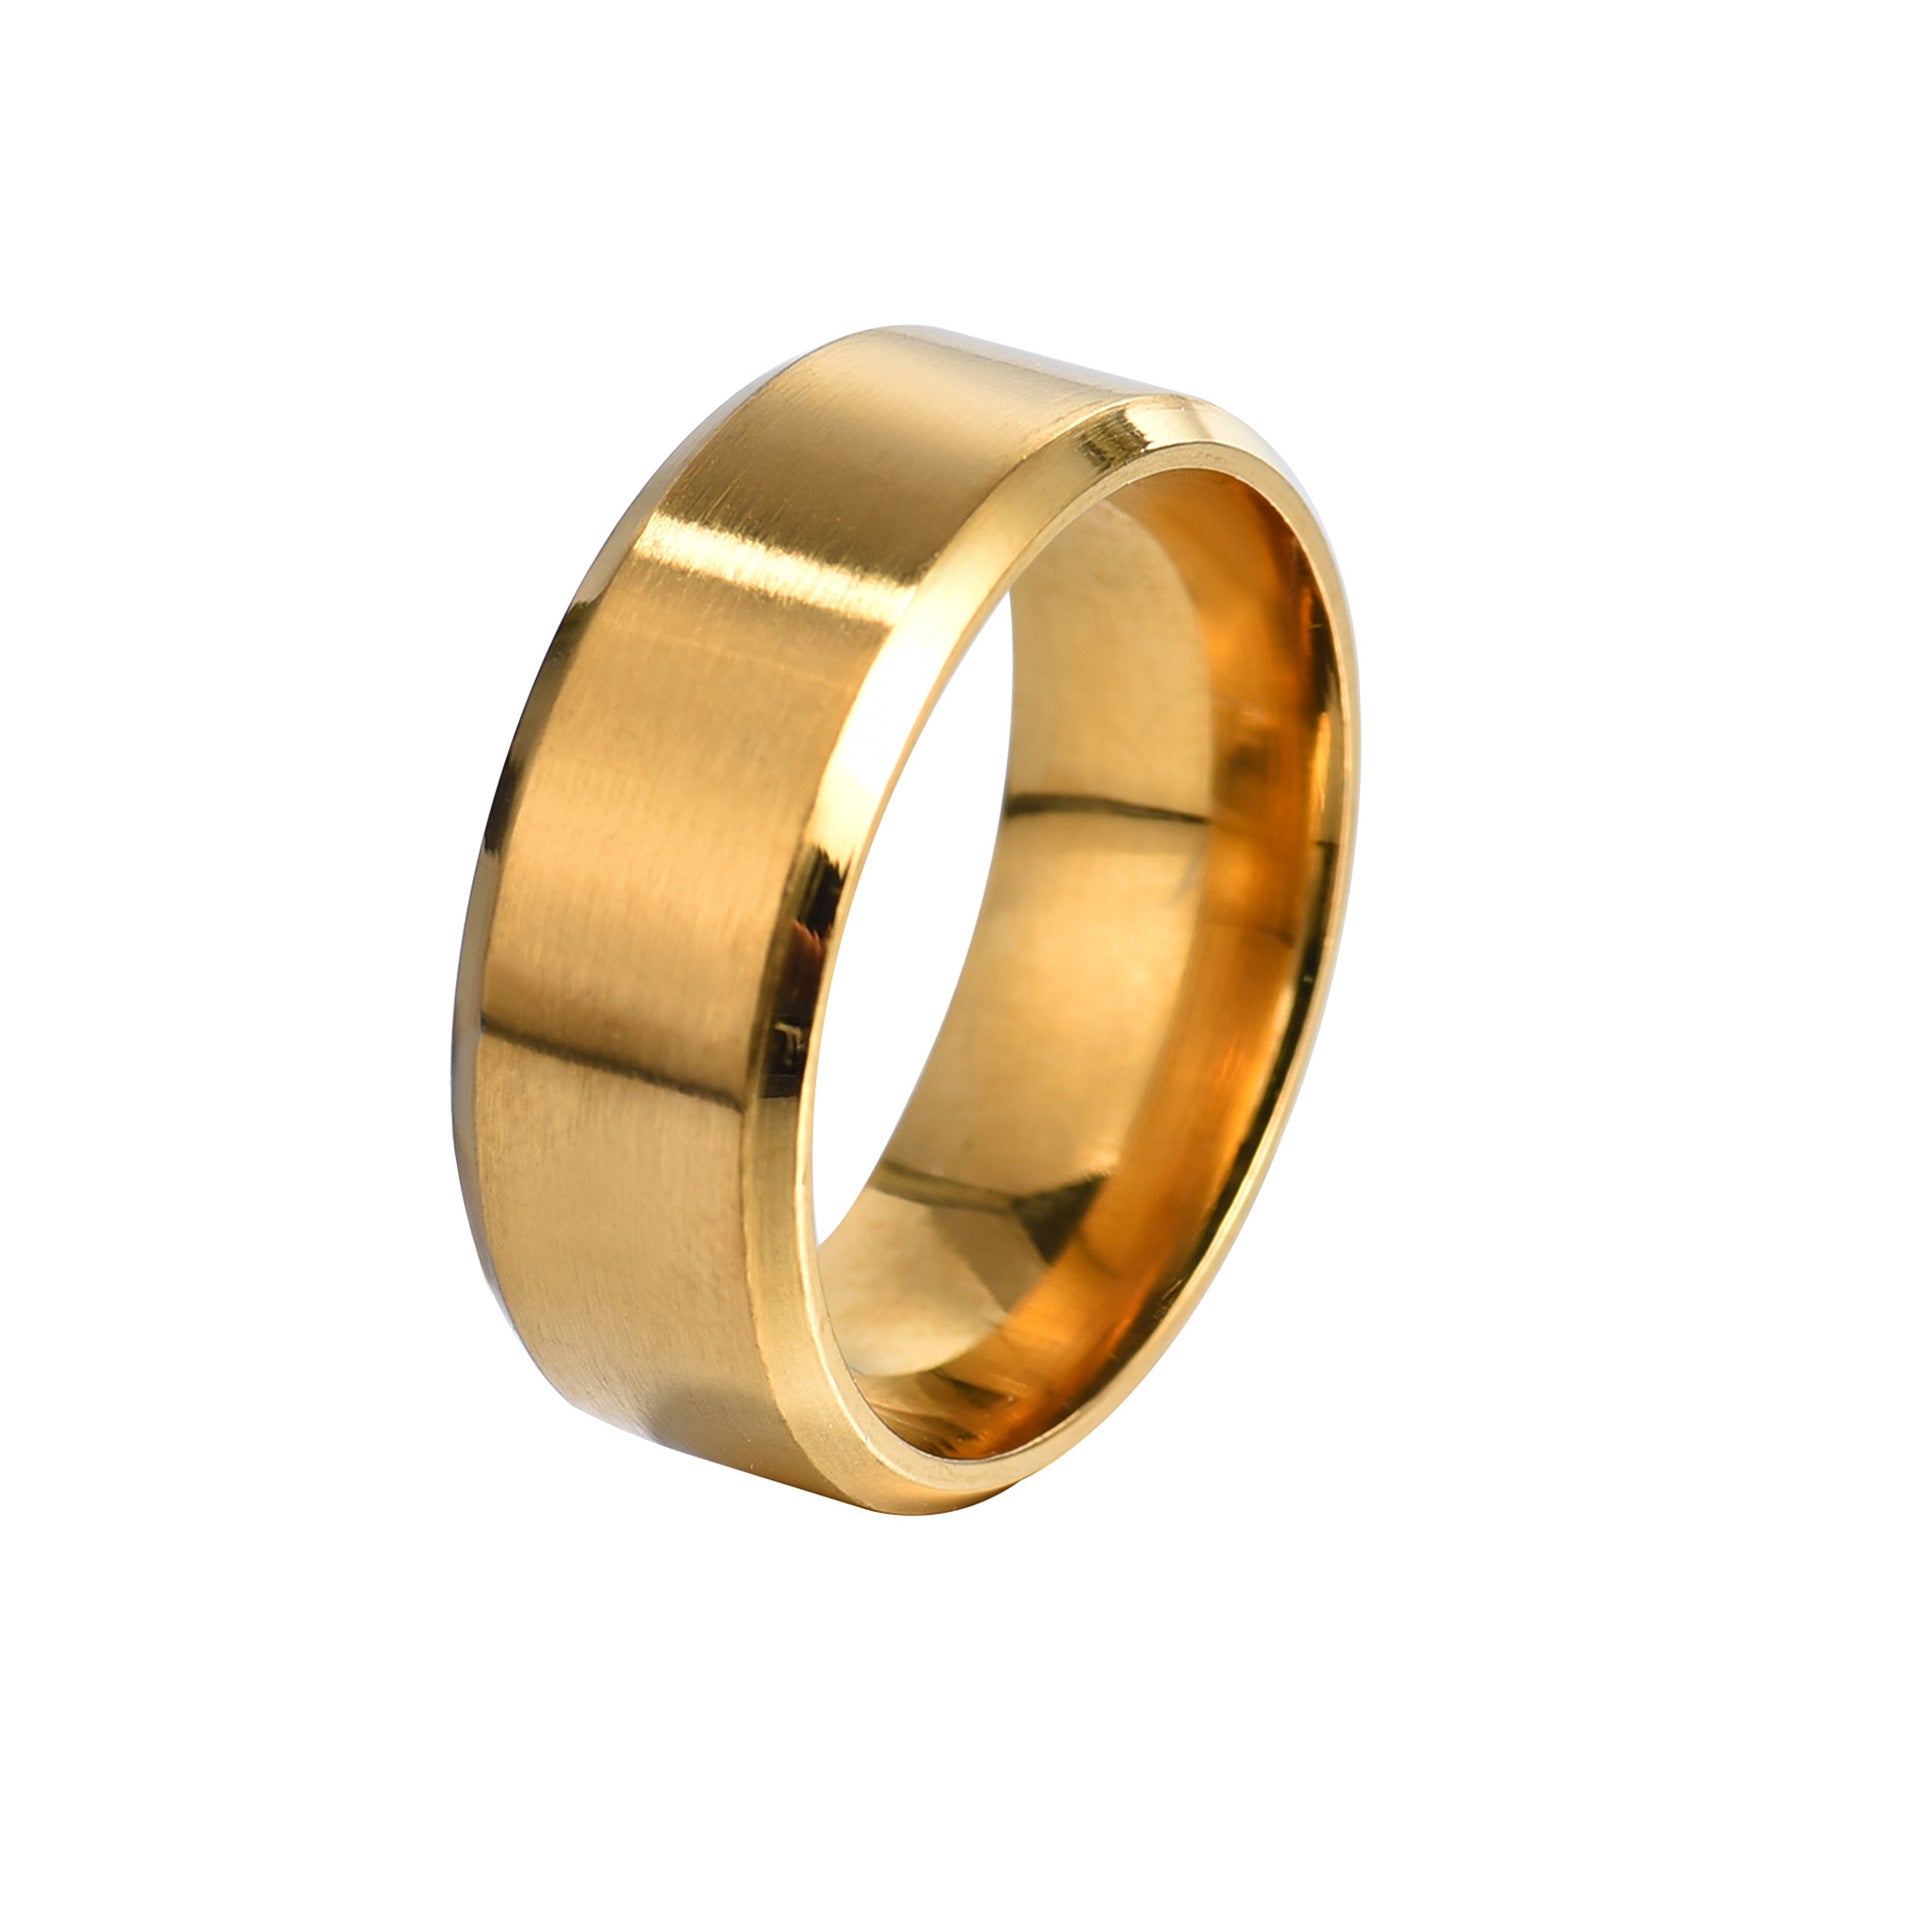 Gold Colored 316L Quality Steel Ring Wedding Ring (24 Sizes)